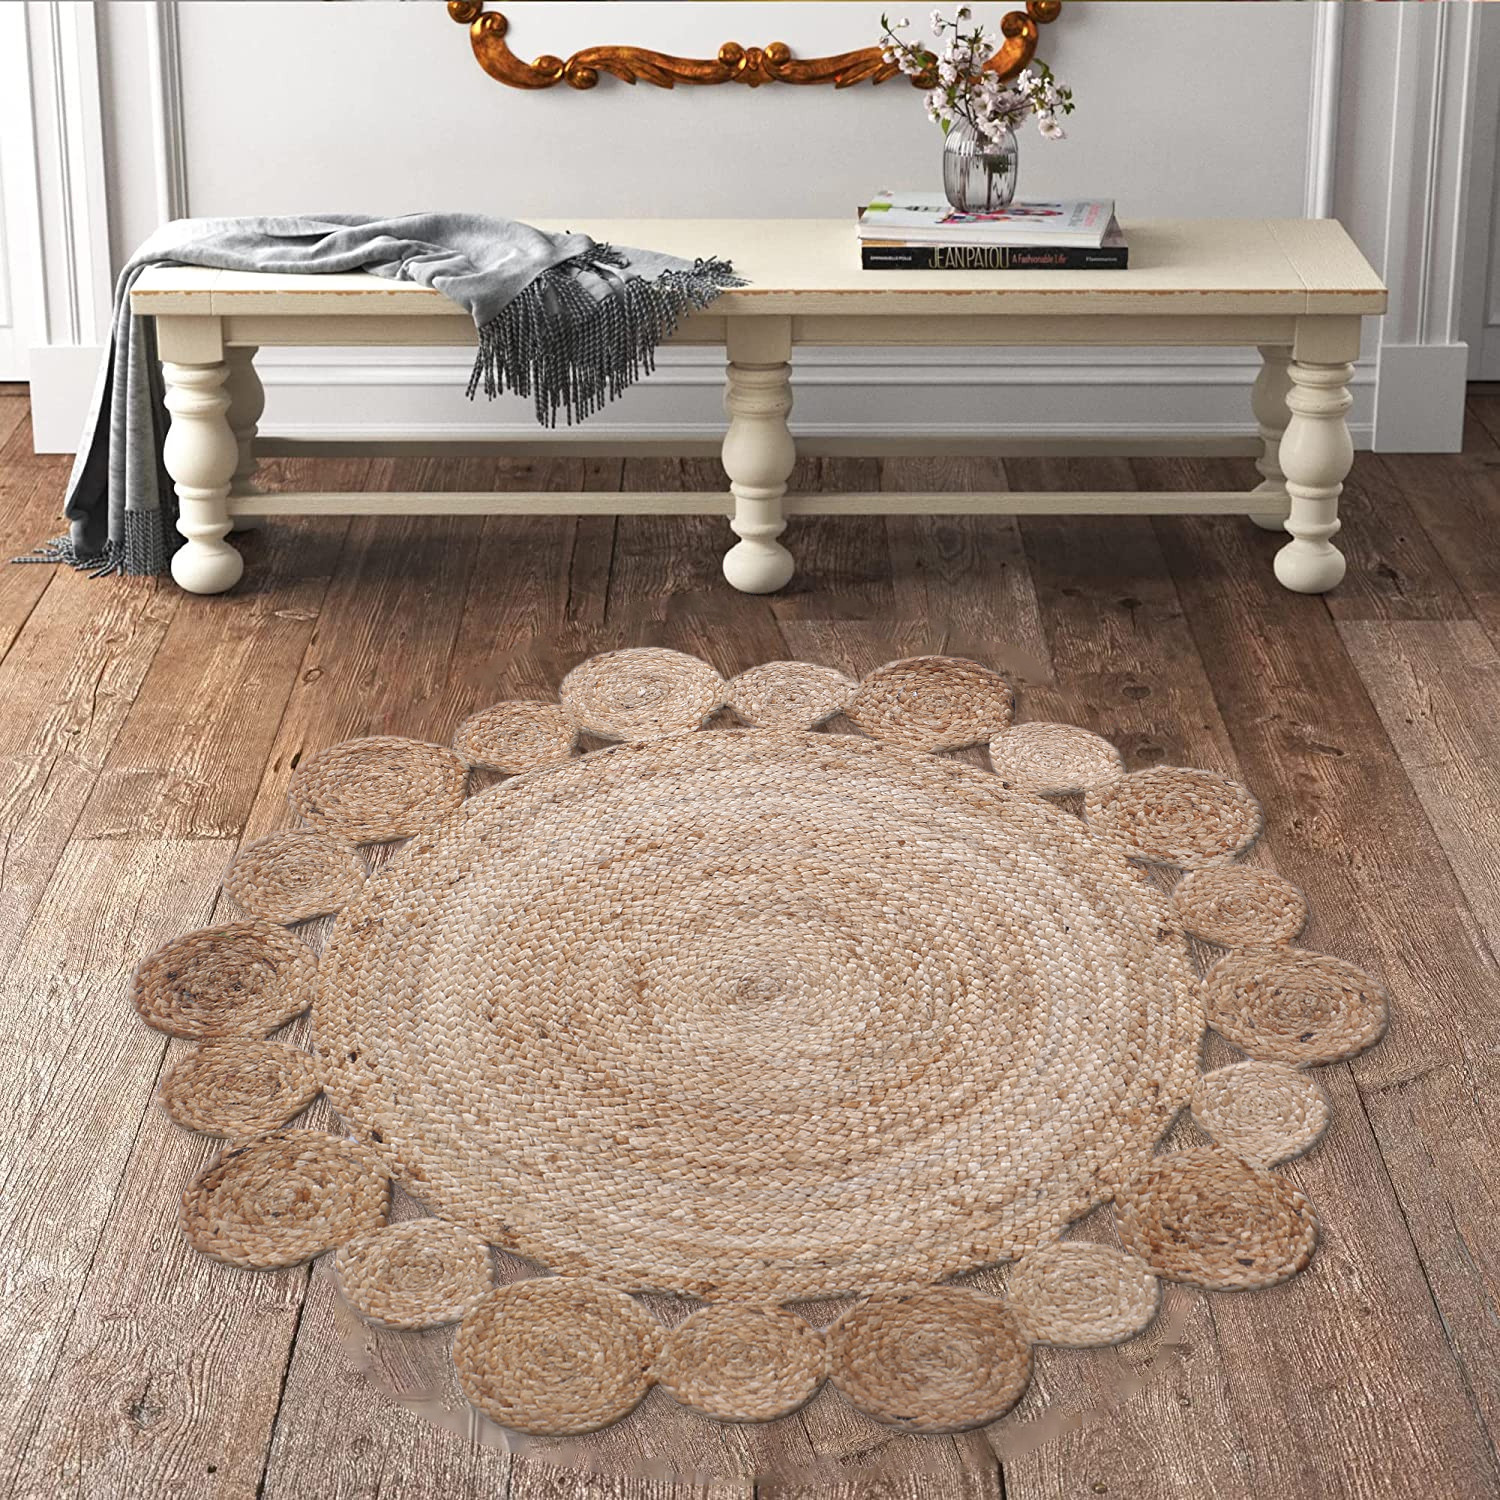 Kuber Industries Hand Woven Carpet Rugs|Natural Braided Jute Door mat|Multi Round Circle Mat For Bedroom,Living Room,Dining Room,Yoga,66x66 cm,(Brown)